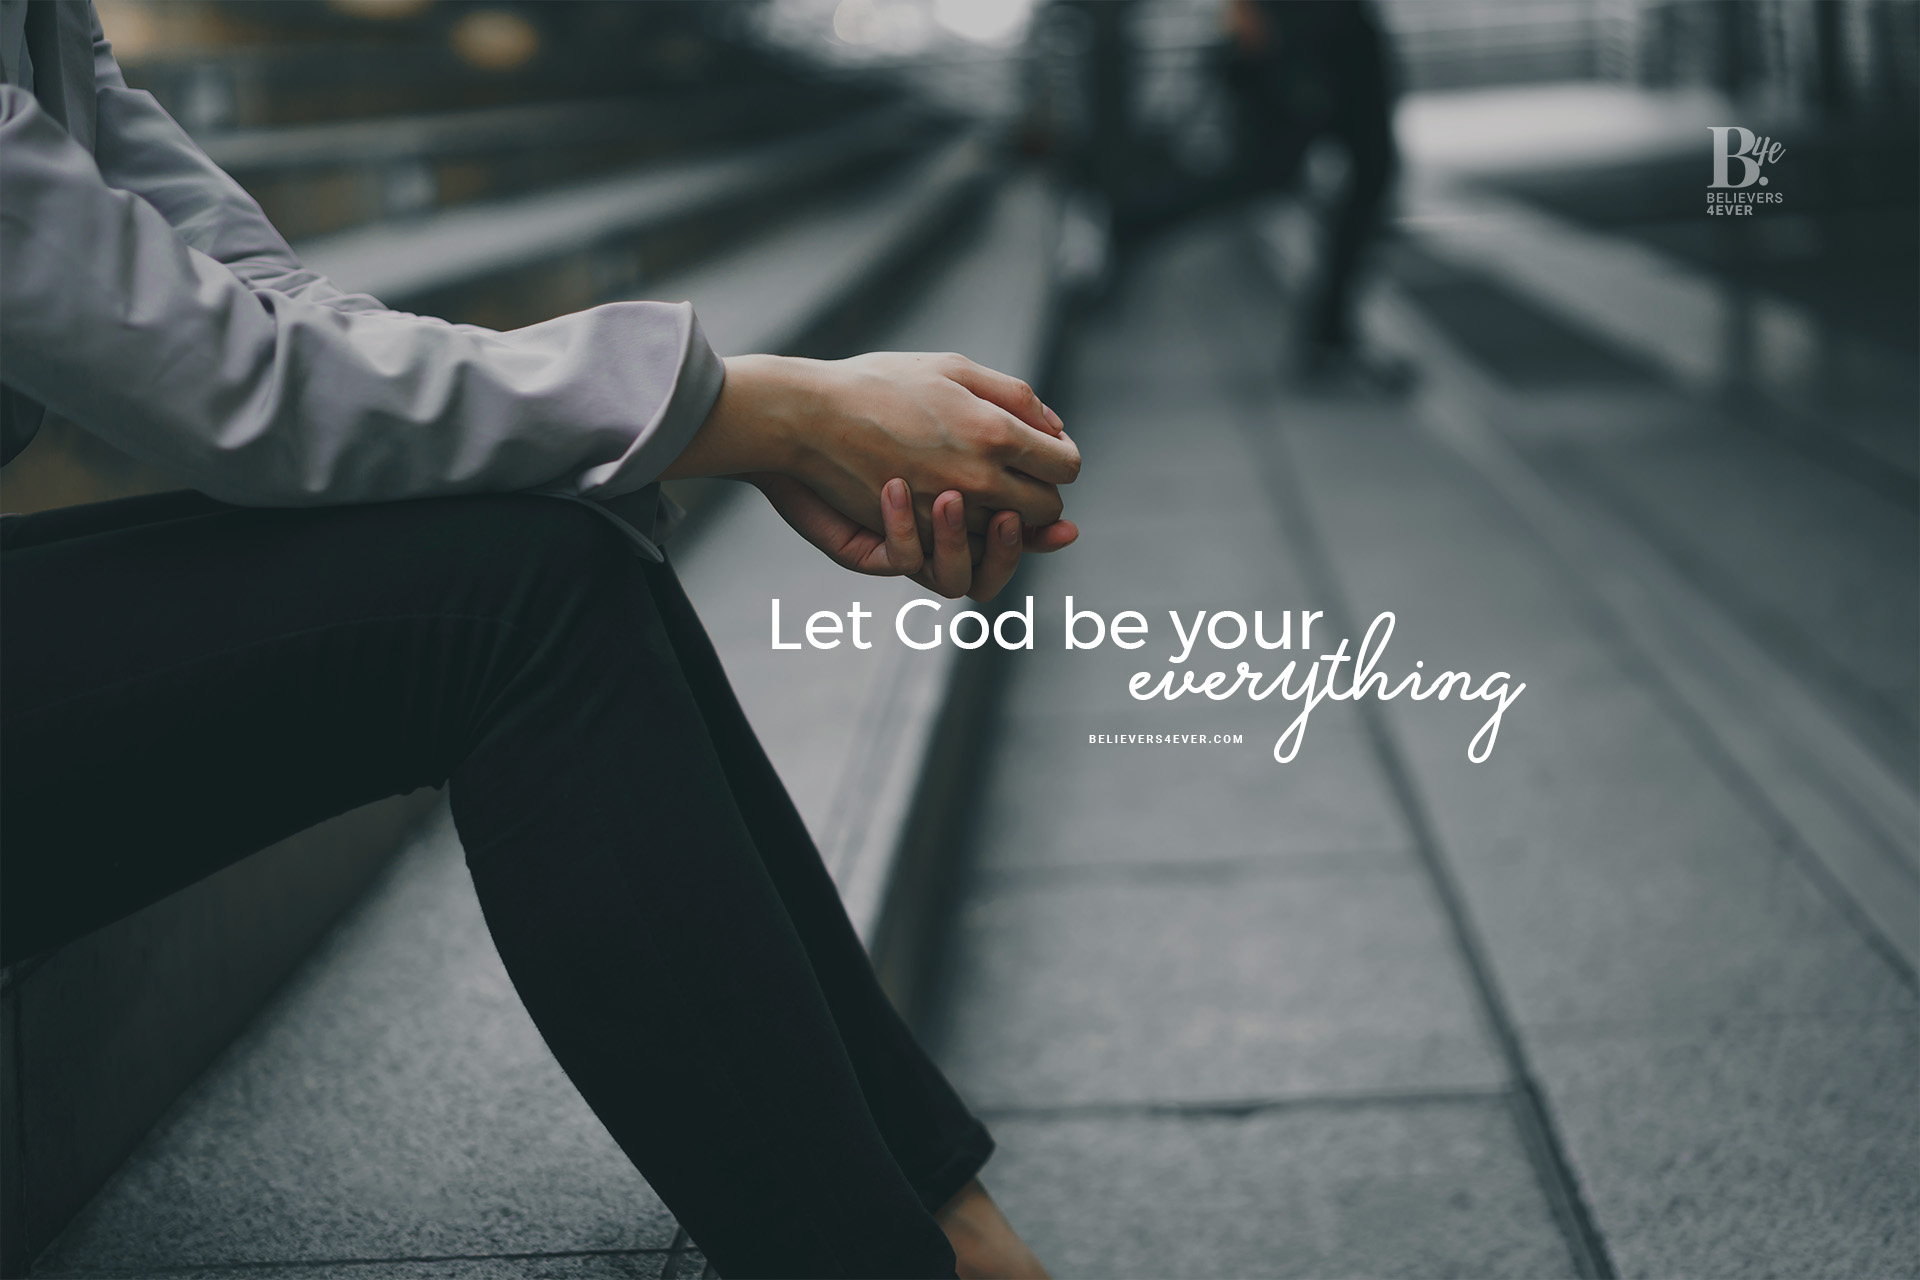 Let God be your everything